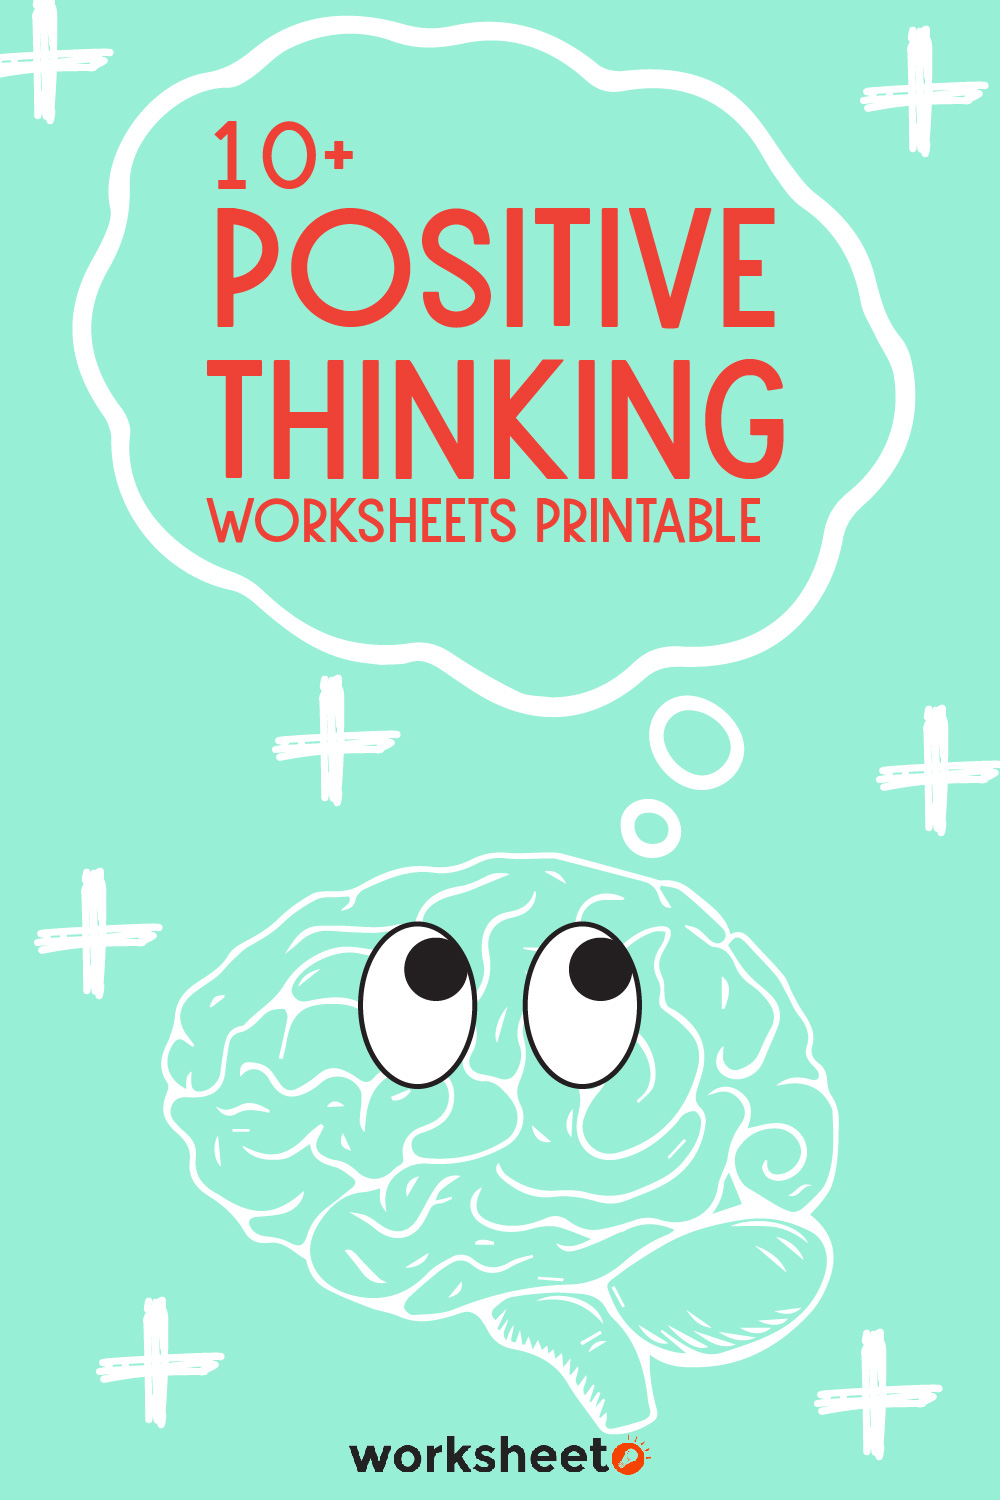 15 Images of Positive Thinking Worksheets Printable